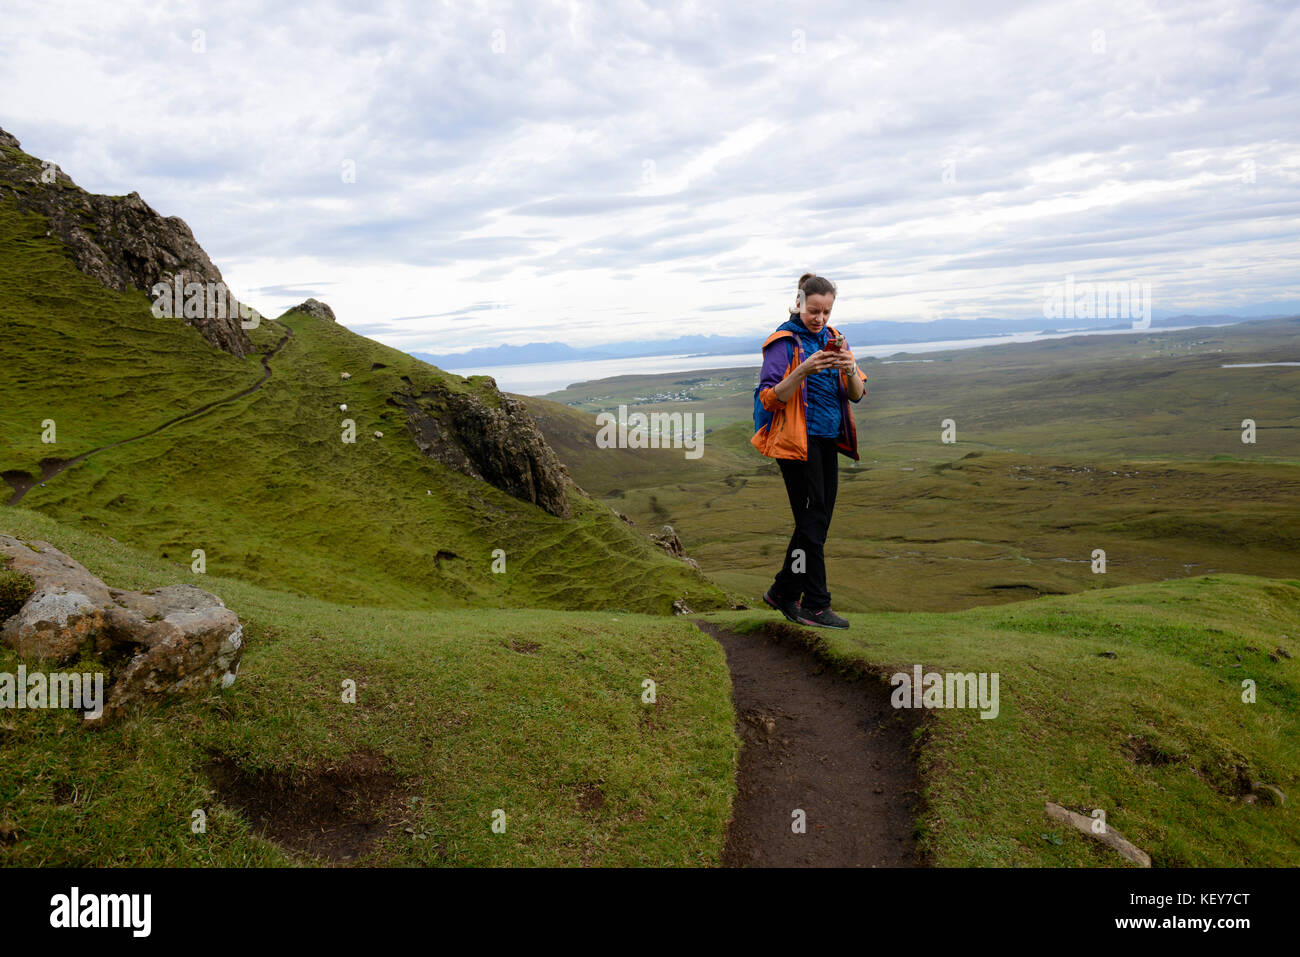 Scottish HIghland, Isle of Skye. Cuith-Raing, or Quiraing. Hiker takes a panoramic picture with her cell phone. Stock Photo